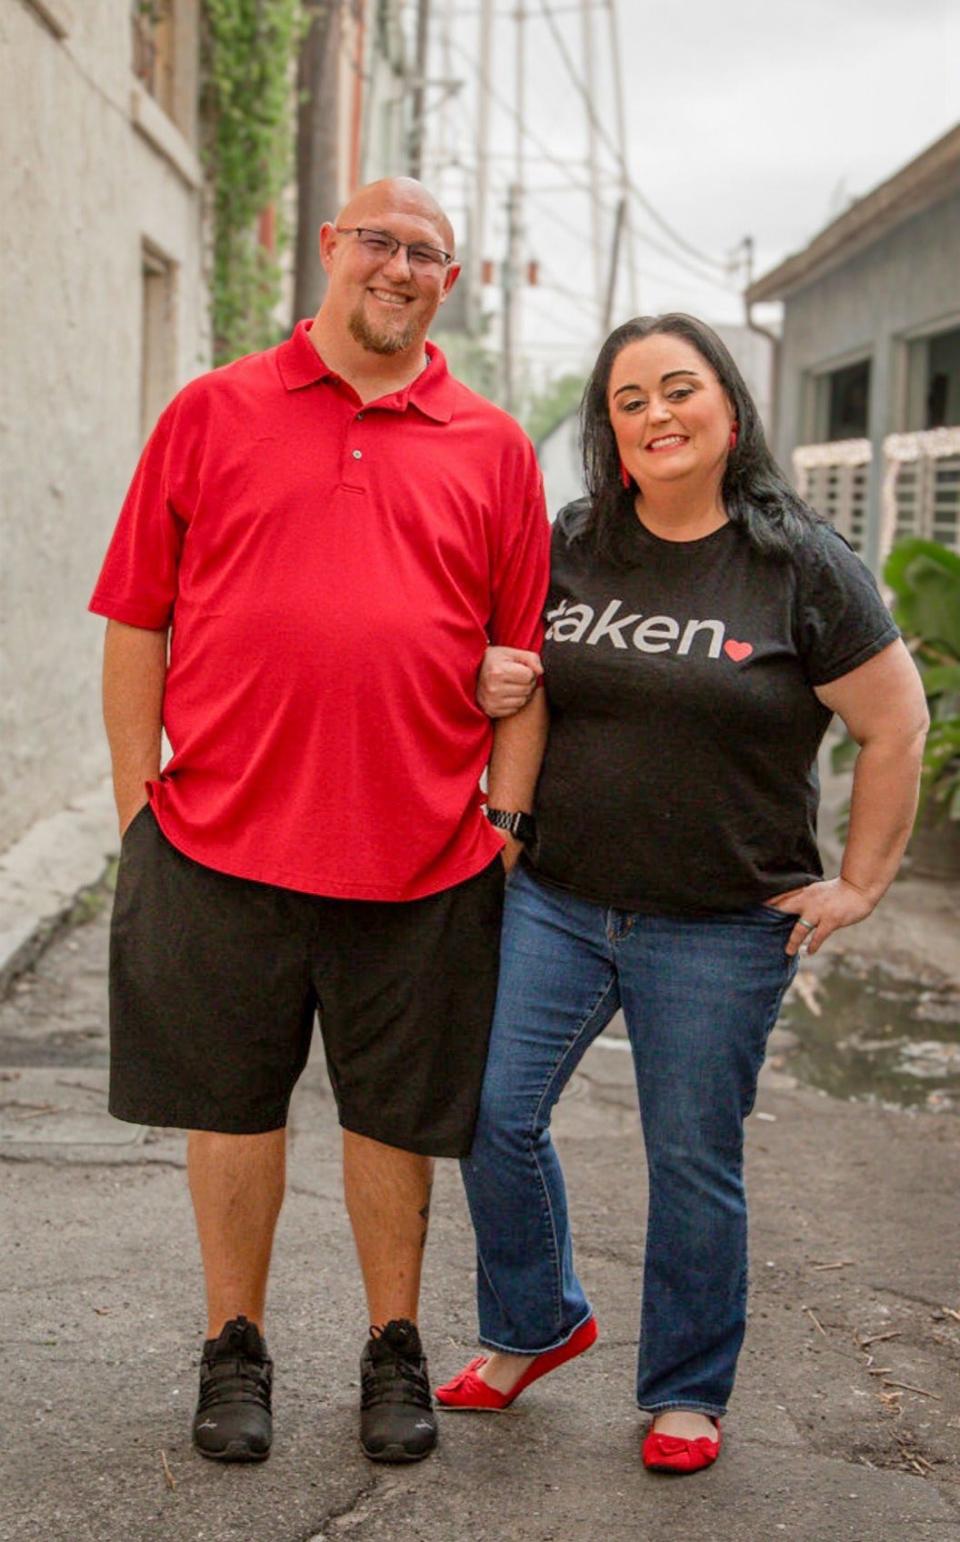 Ed Strickler of Haines City has polycystic kidney disease, a genetic disorder. His wife, Nancy, has taken charge of raising money to help cover the costs related to the procedure and Ed's recovery.